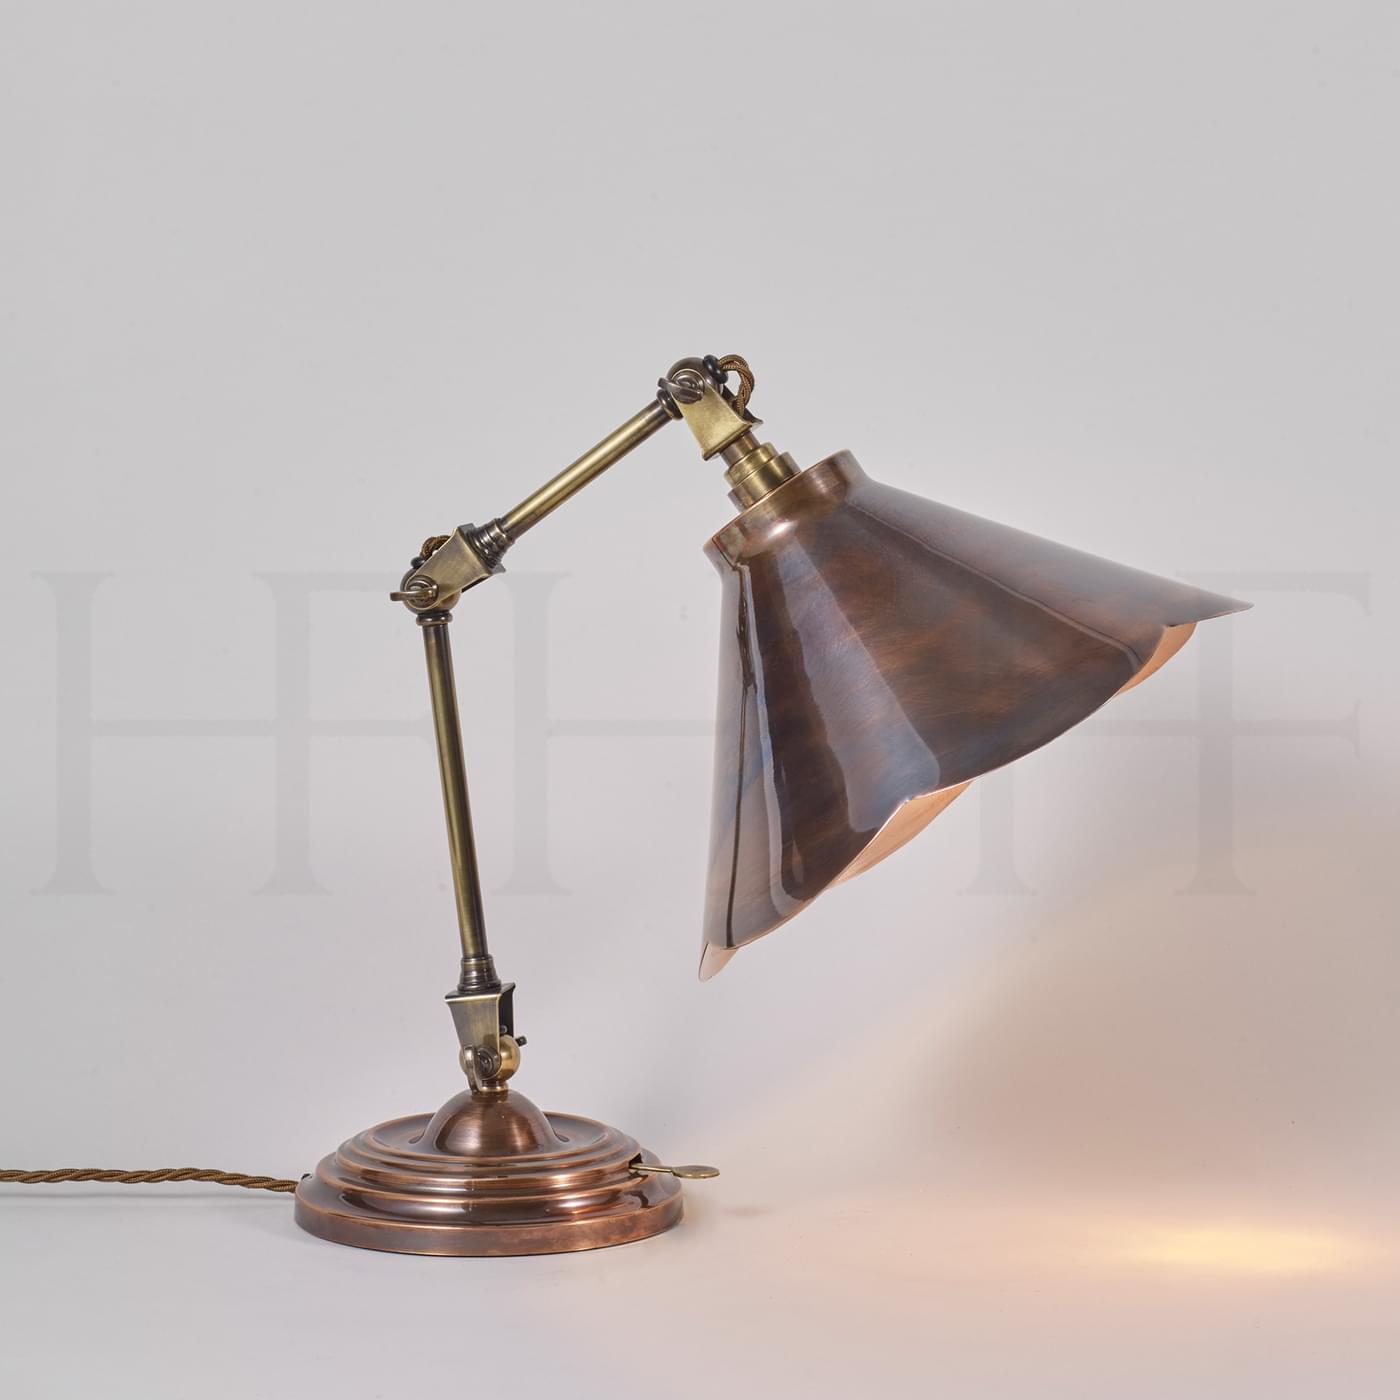 TL 2 Articulated Arm Desk Lamp Antique Brass Antique Copper Scalloped Shade L